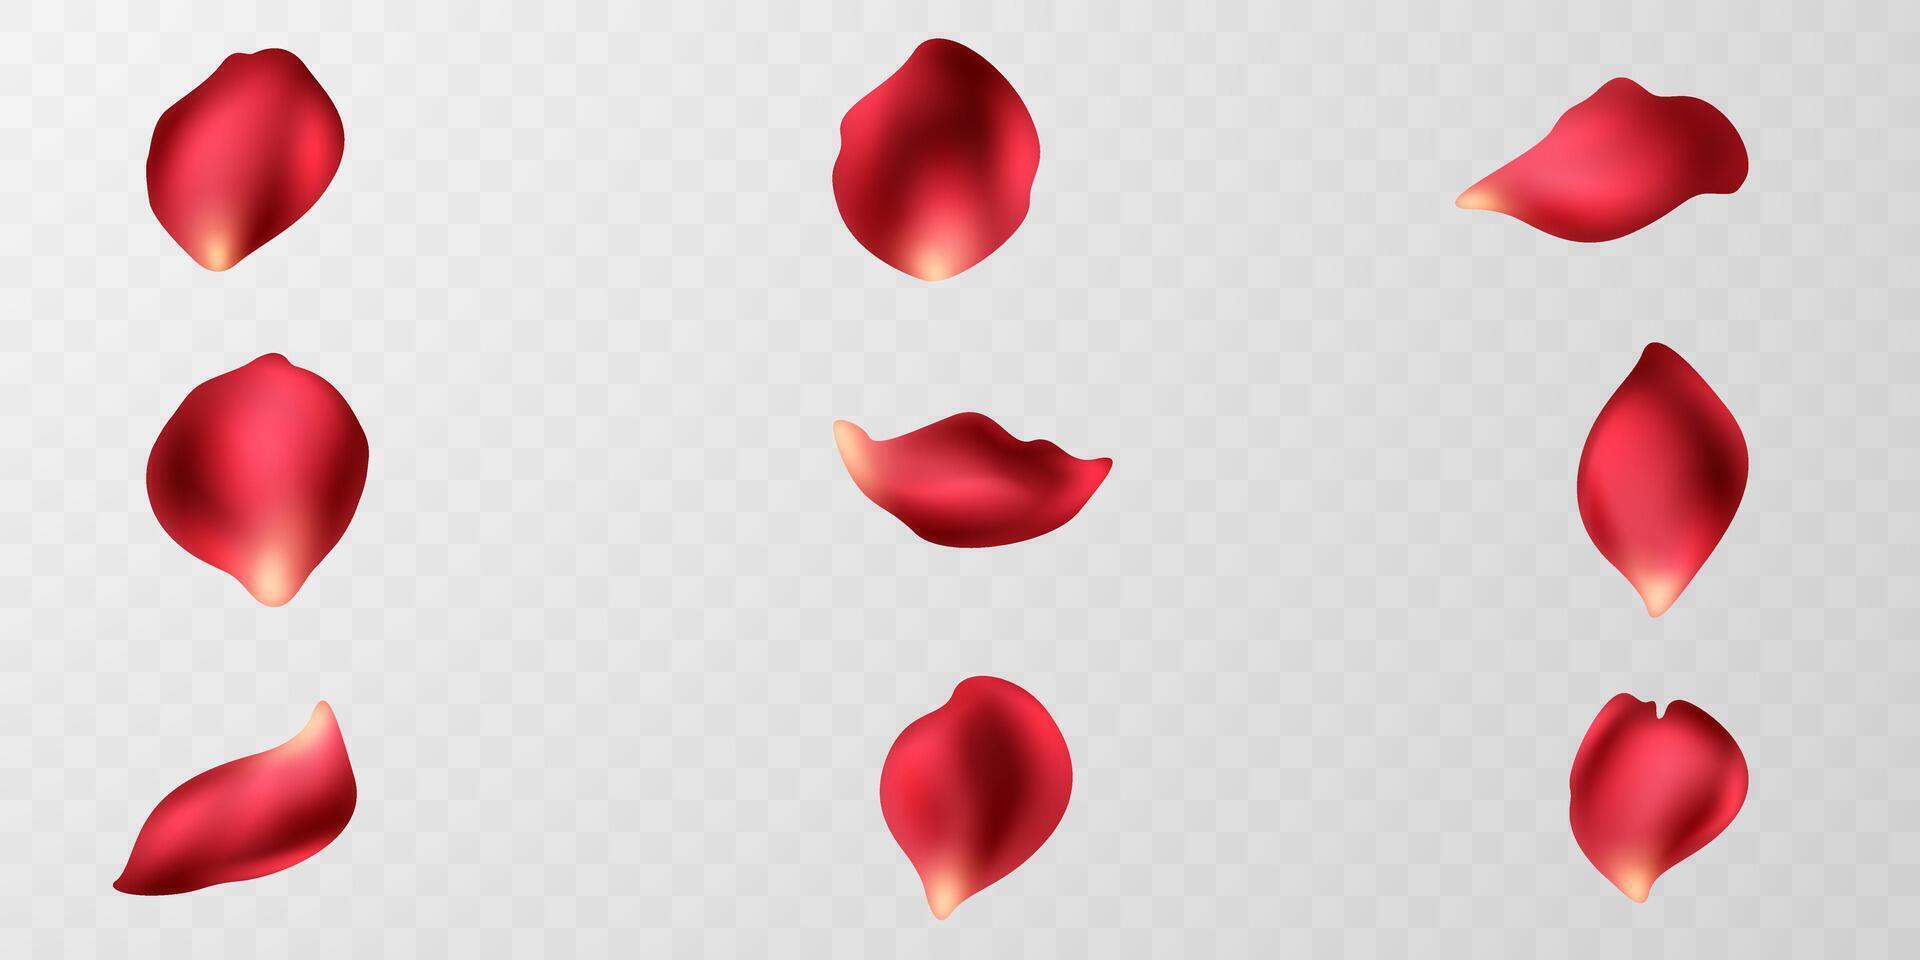 beautiful red rose petals background vector illustration